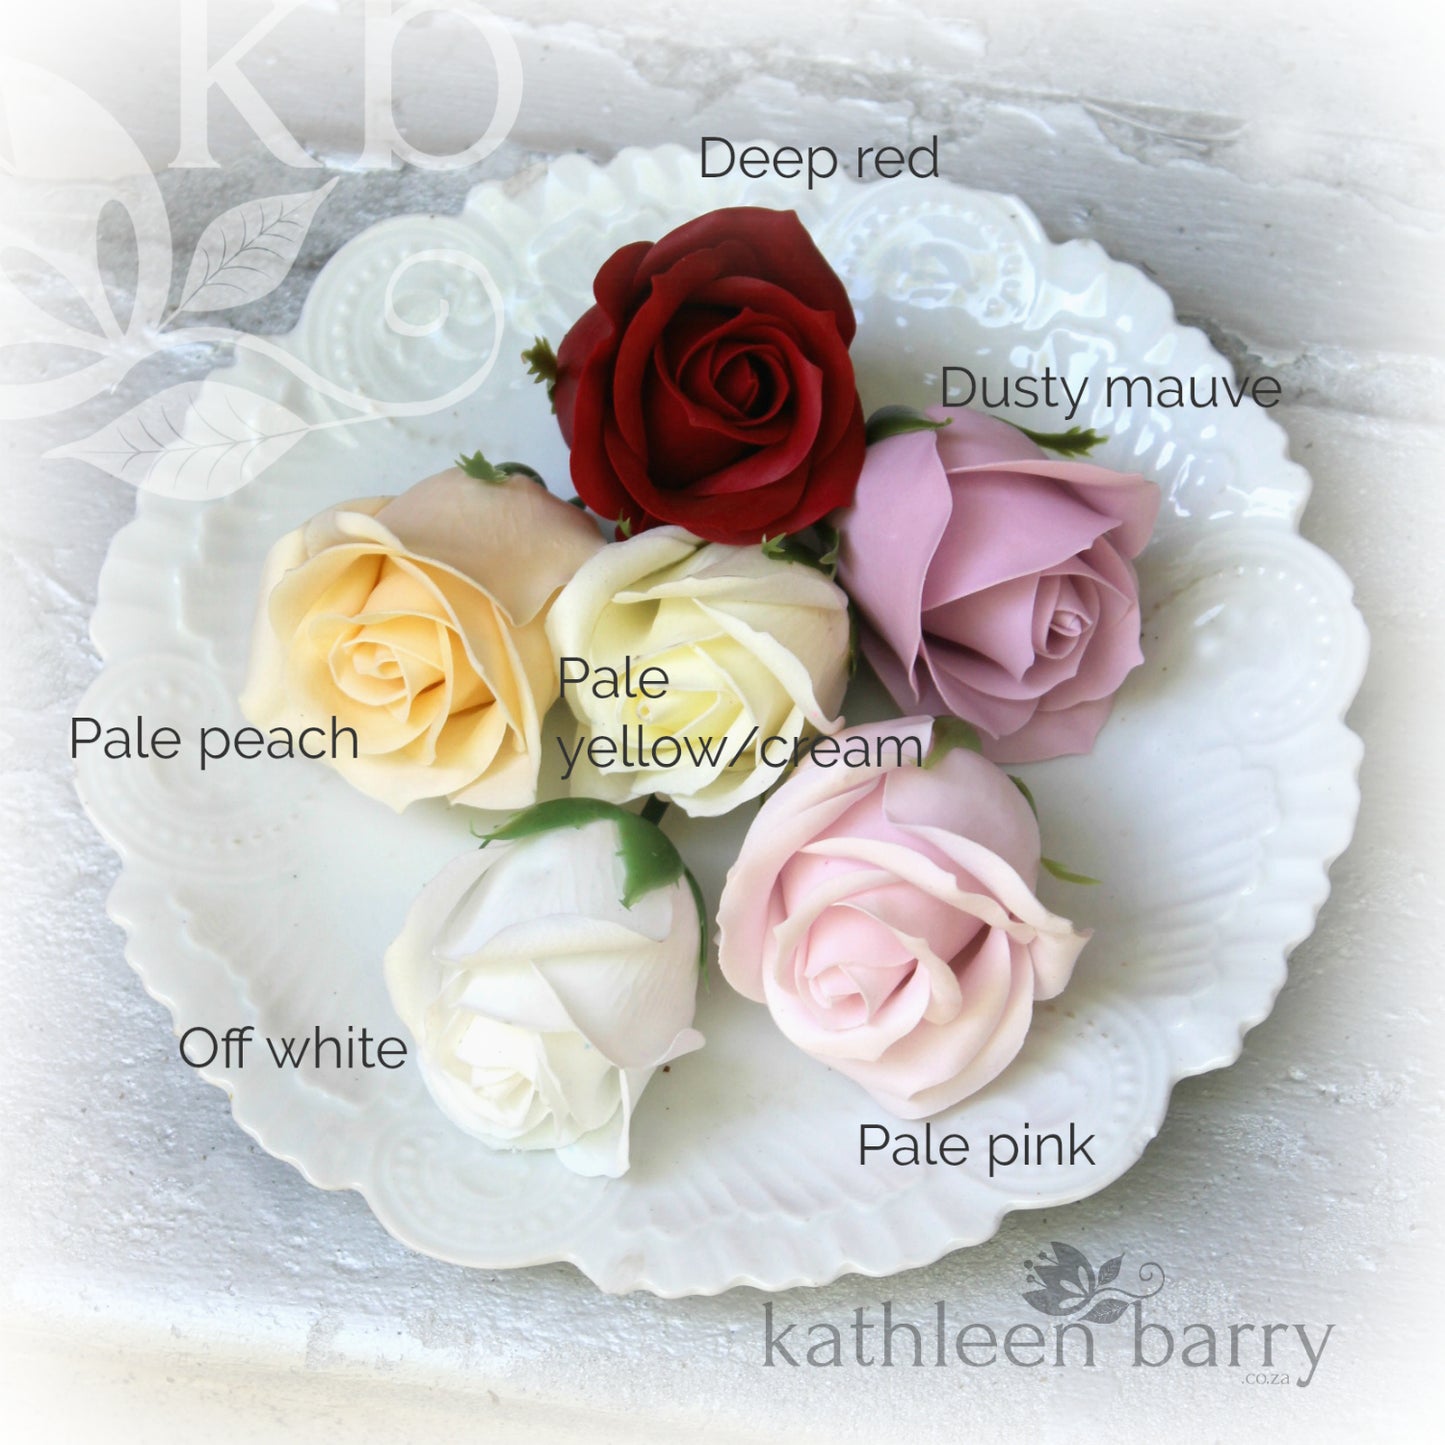 Boutonniere - groom lapel pin roses - Everlasting - assorted colors available